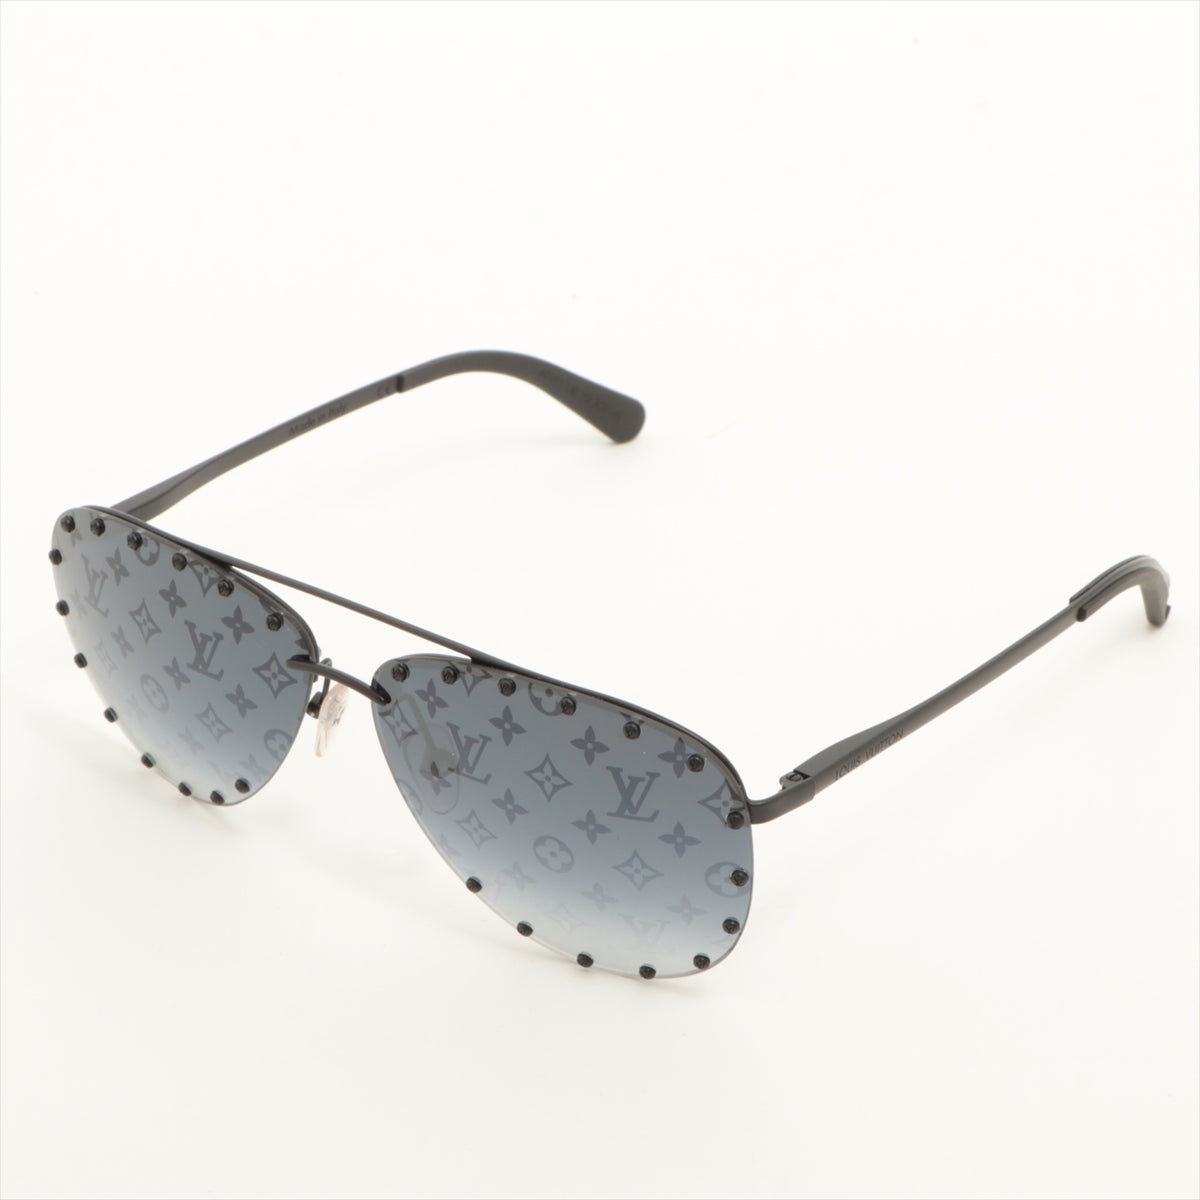 Compare prices for The Party Sunglasses (Z0923U) in official stores